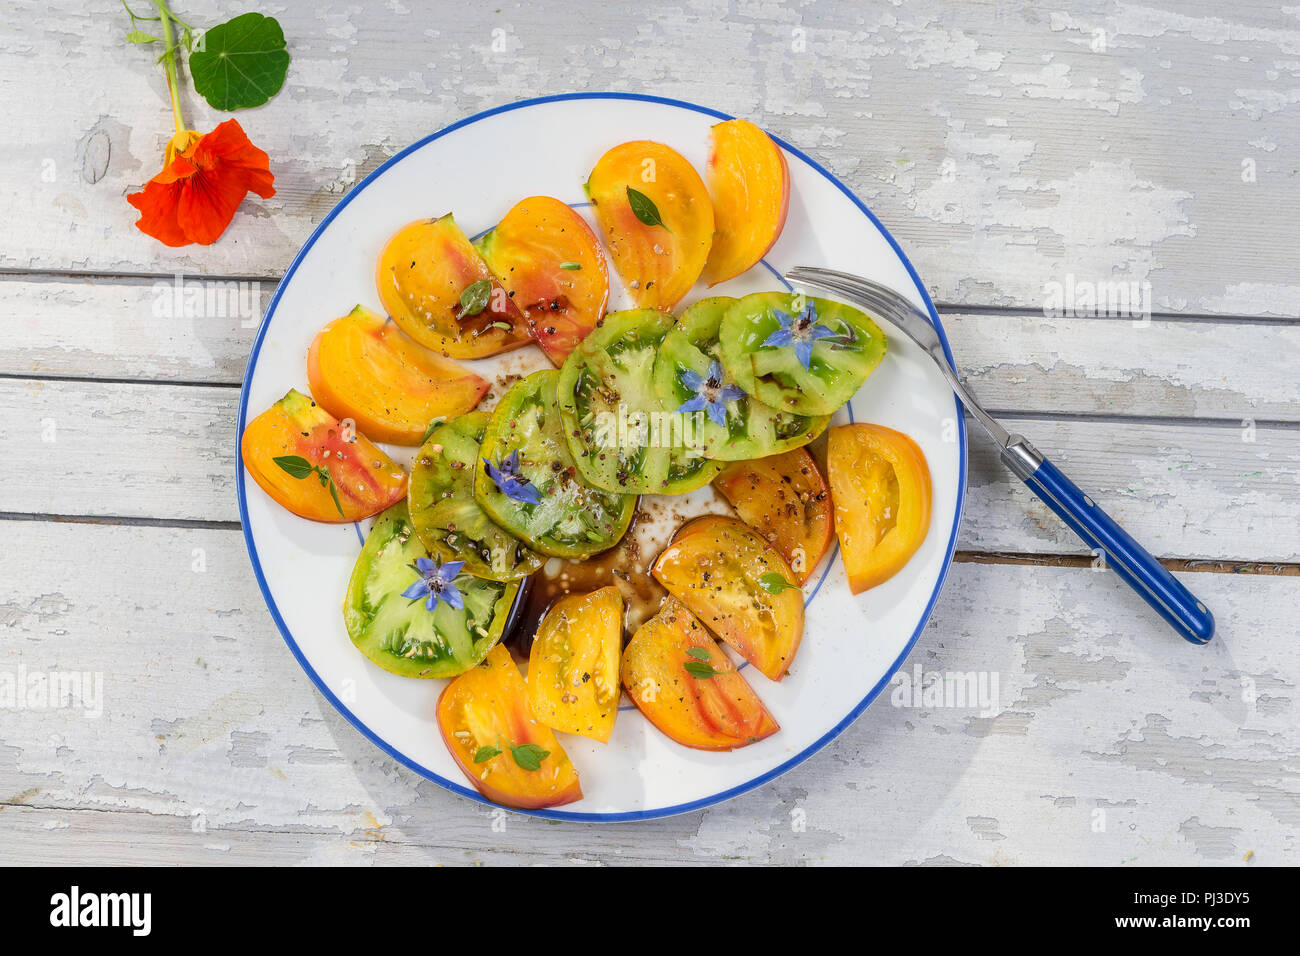 Ancient Tomatoes. Salad of various and colorful Ancient tomatoes Stock Photo